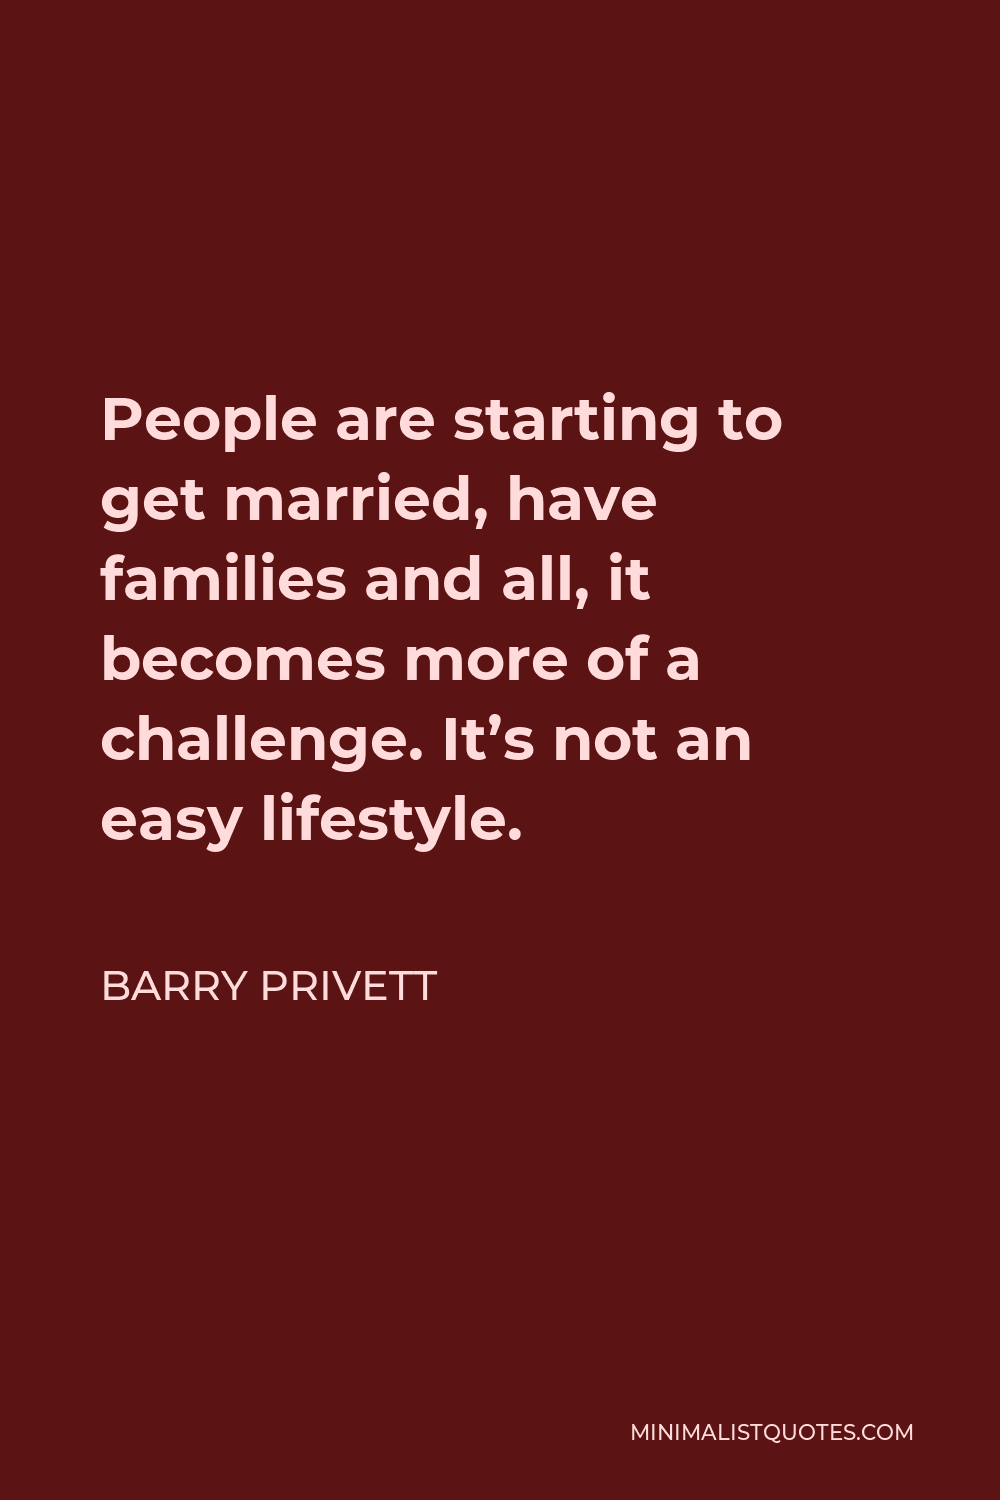 Barry Privett Quote - People are starting to get married, have families and all, it becomes more of a challenge. It’s not an easy lifestyle.